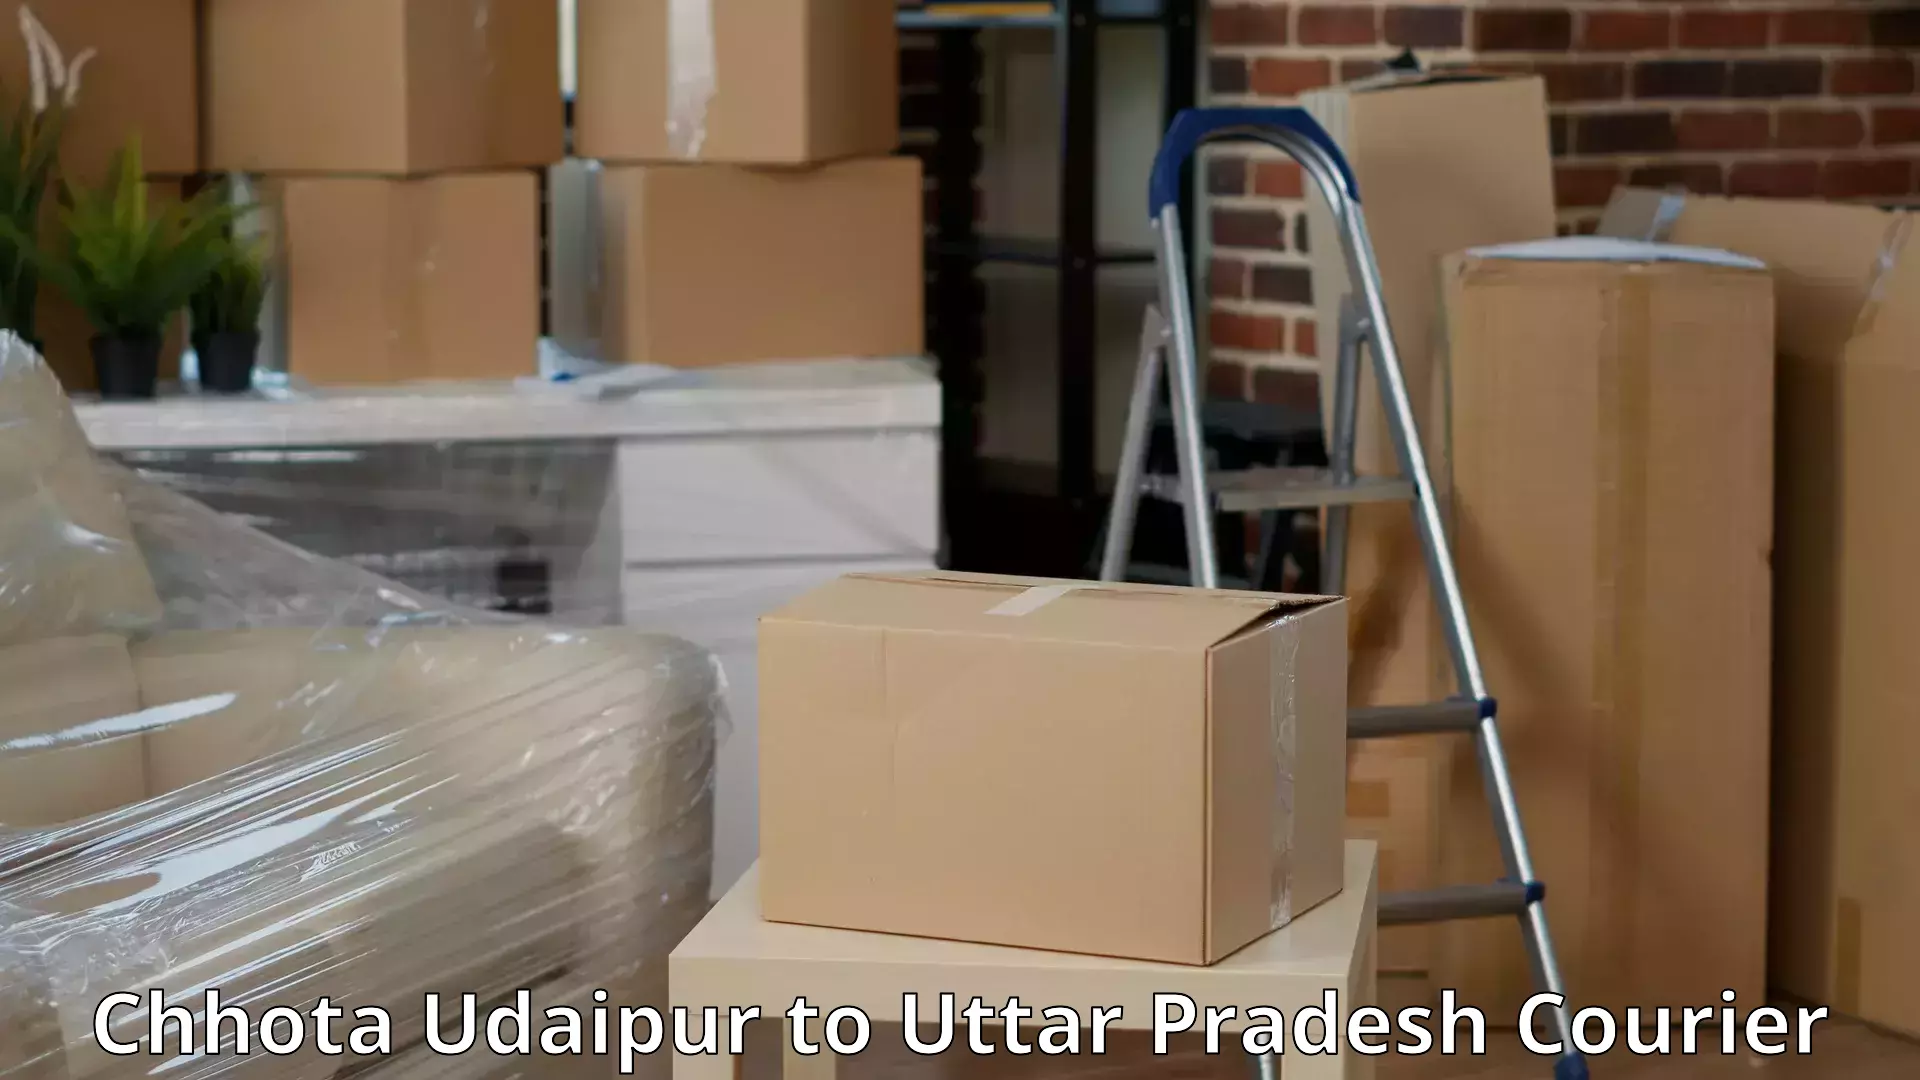 Furniture delivery service Chhota Udaipur to Afzalgarh